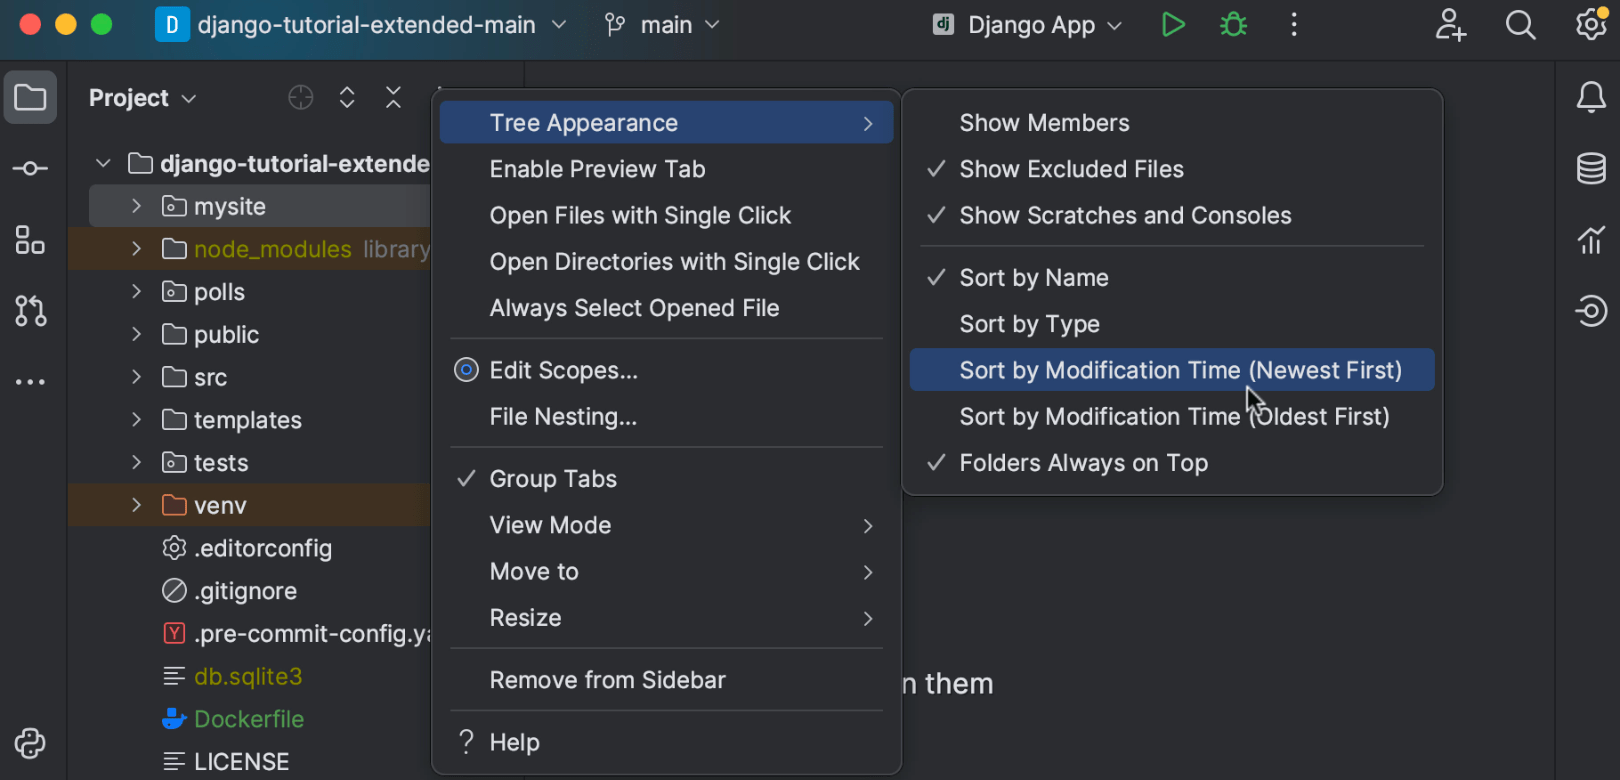 File sorting by modification time in the Project view